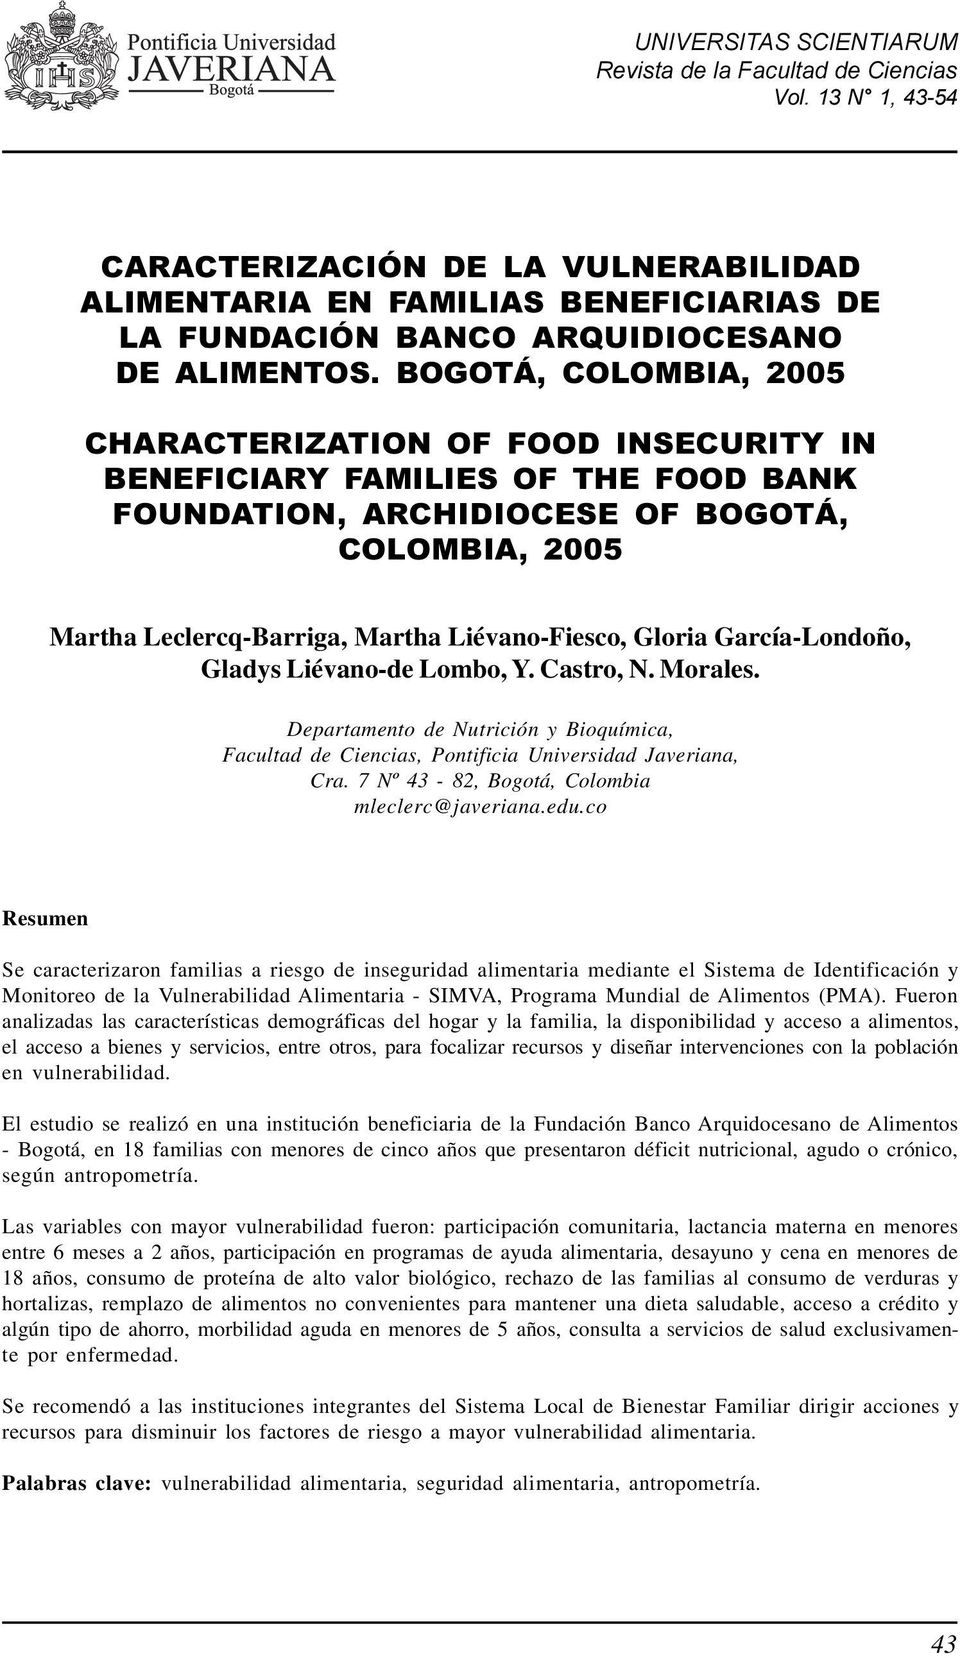 BOGOTÁ, COLOMBIA, 2005 CHARACTERIZATION OF FOOD INSECURITY IN BENEFICIARY FAMILIES OF THE FOOD BANK FOUNDATION, ARCHIDIOCESE OF BOGOTÁ, COLOMBIA, 2005 Martha Leclercq-Barriga, Martha Liévano-Fiesco,